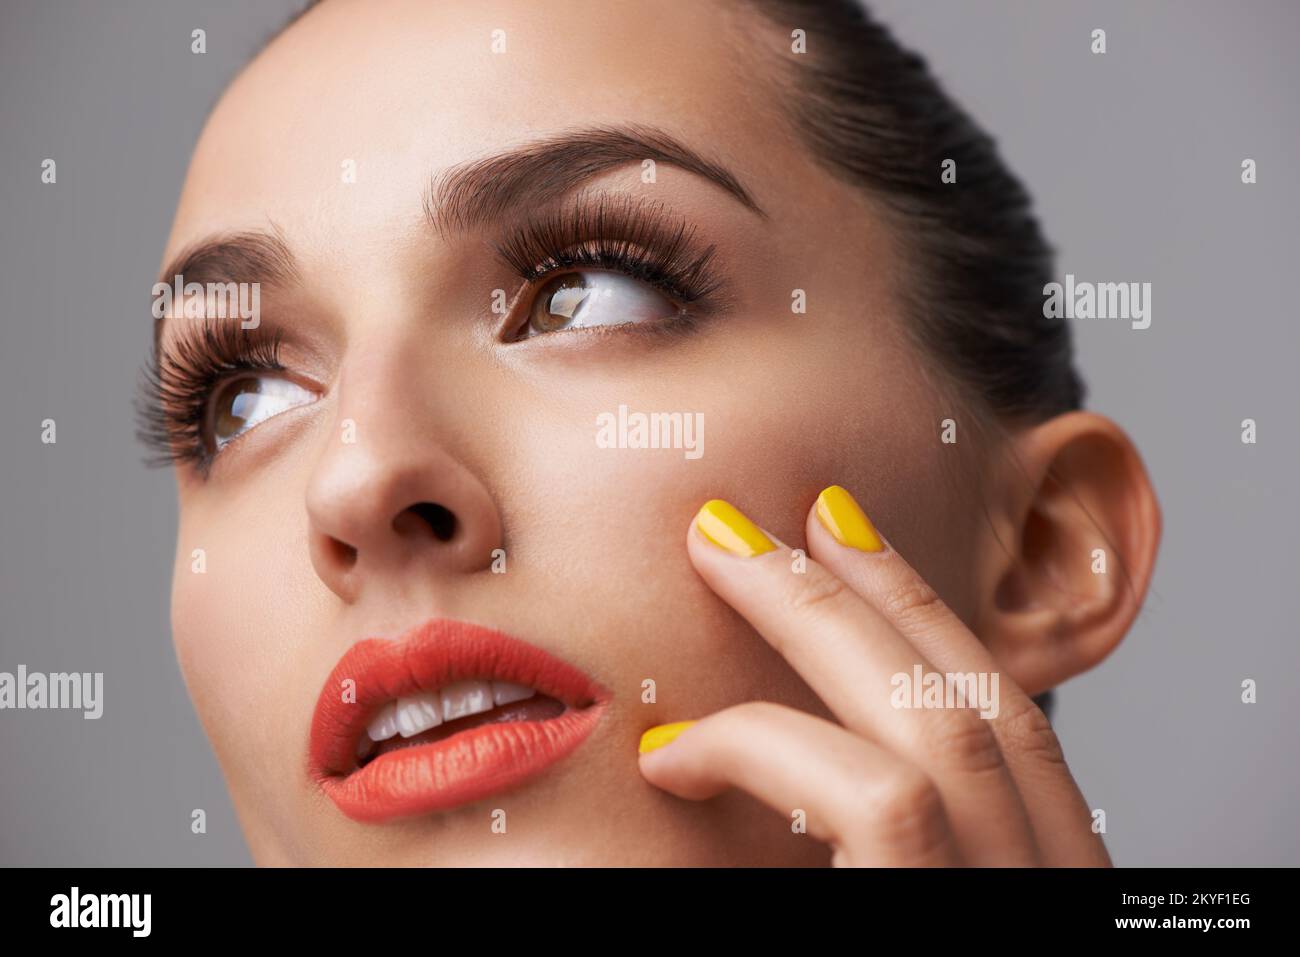 Beauty defined by color. An attractive young woman wearing red lipstick and colourful nail polish. Stock Photo